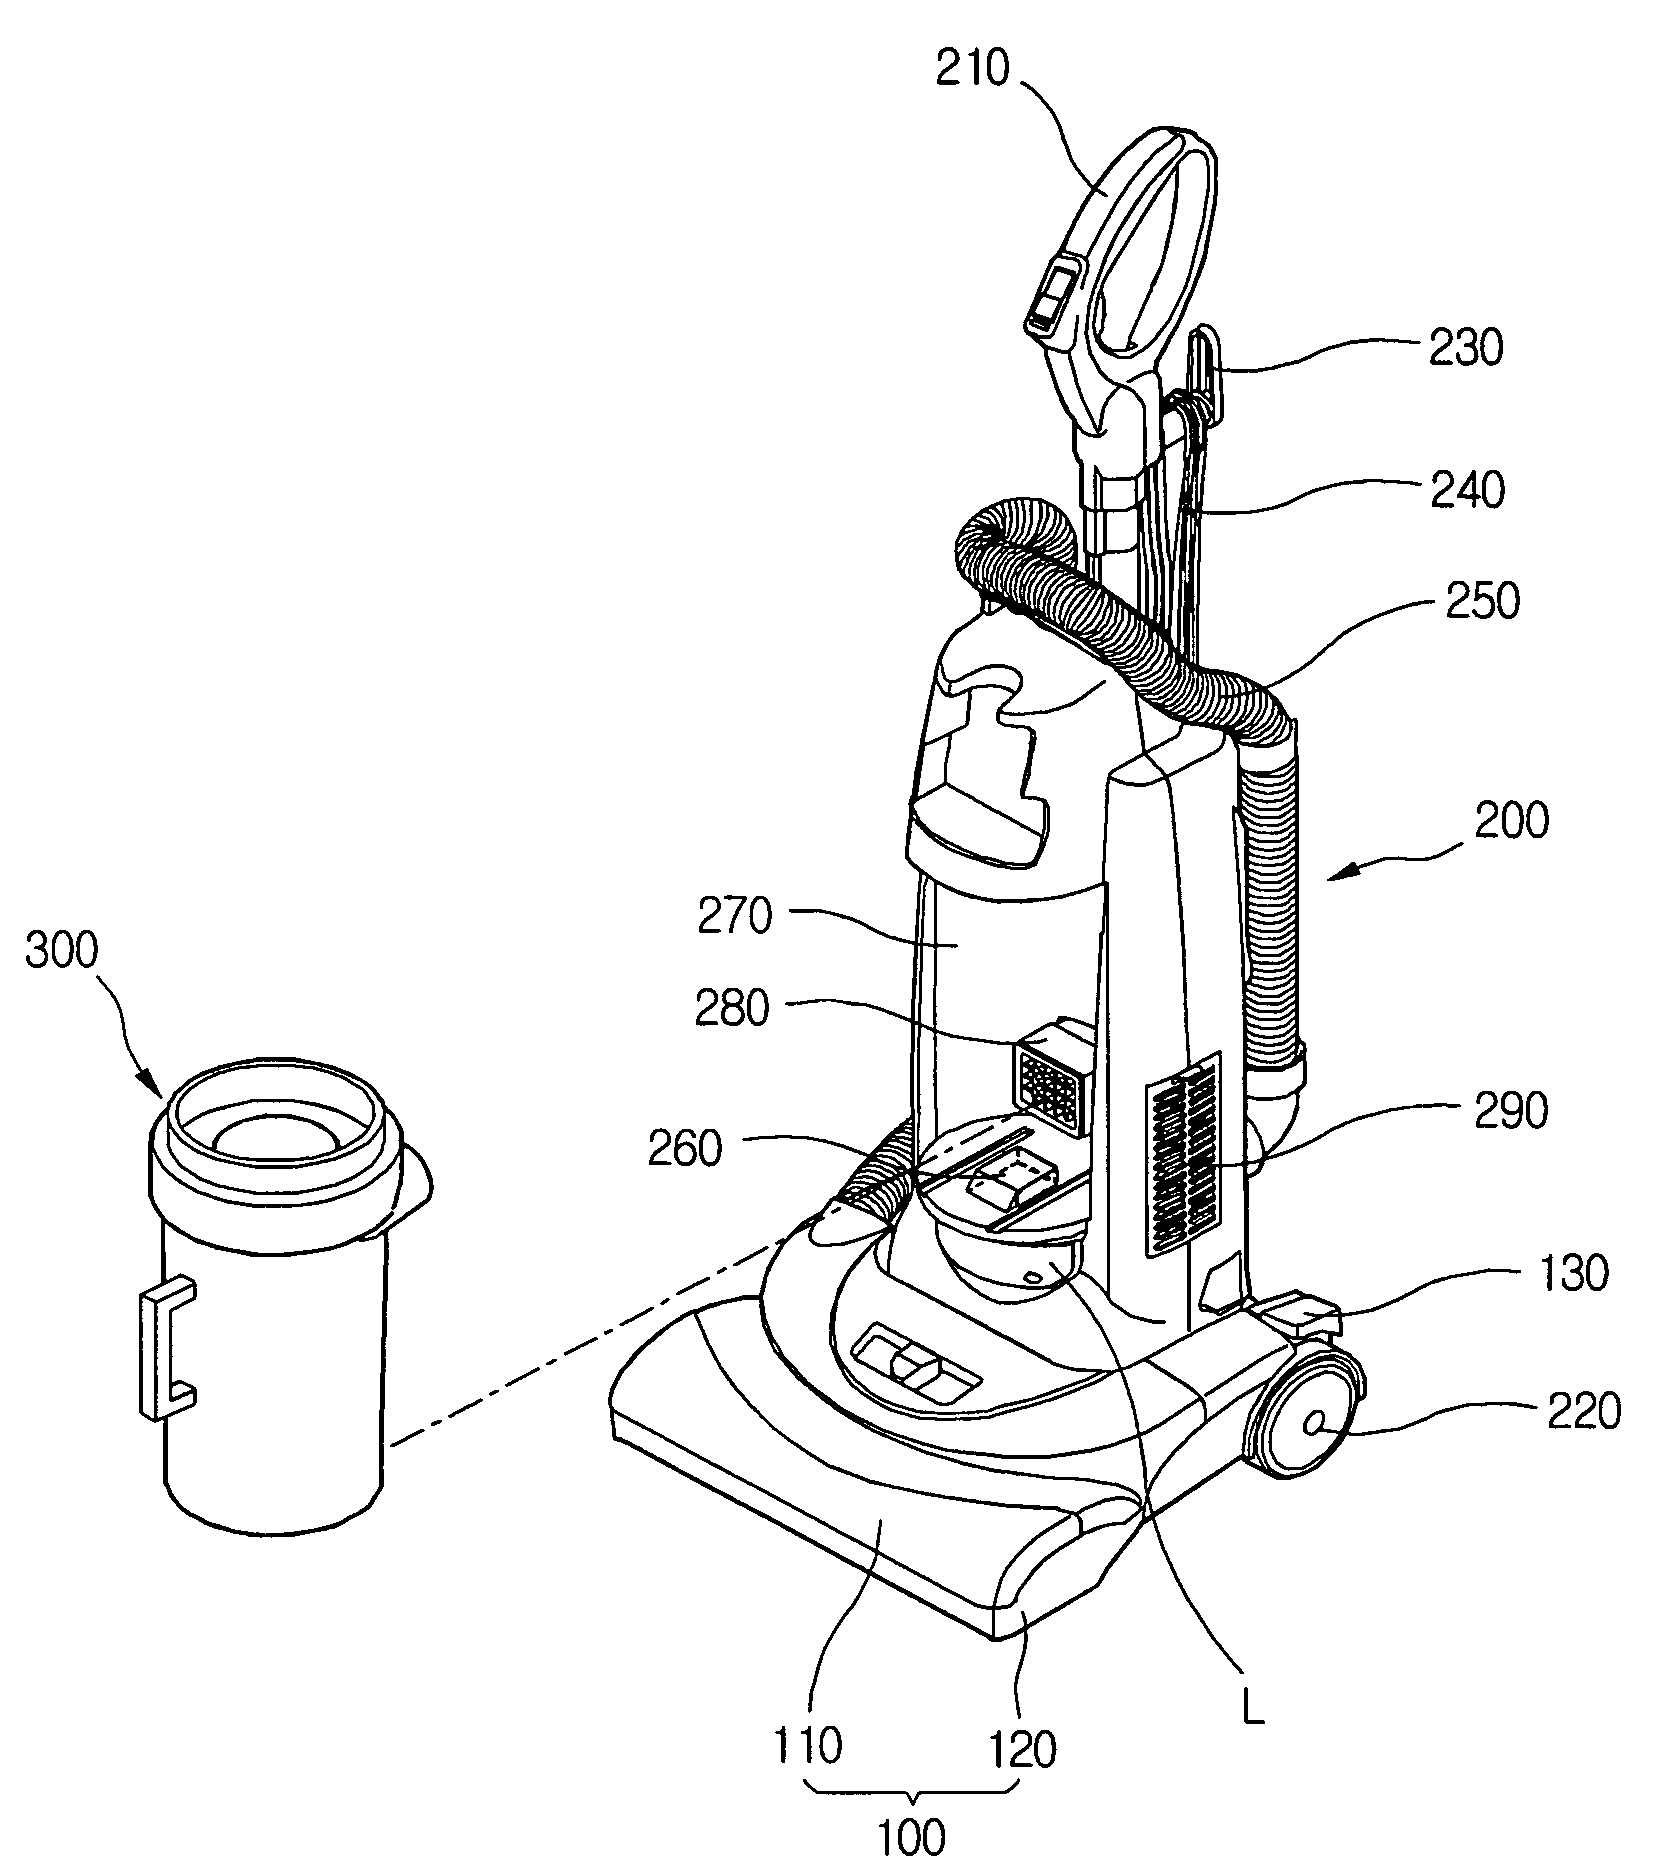 Apparatus of mounting dust collection unit for vacuum cleaner